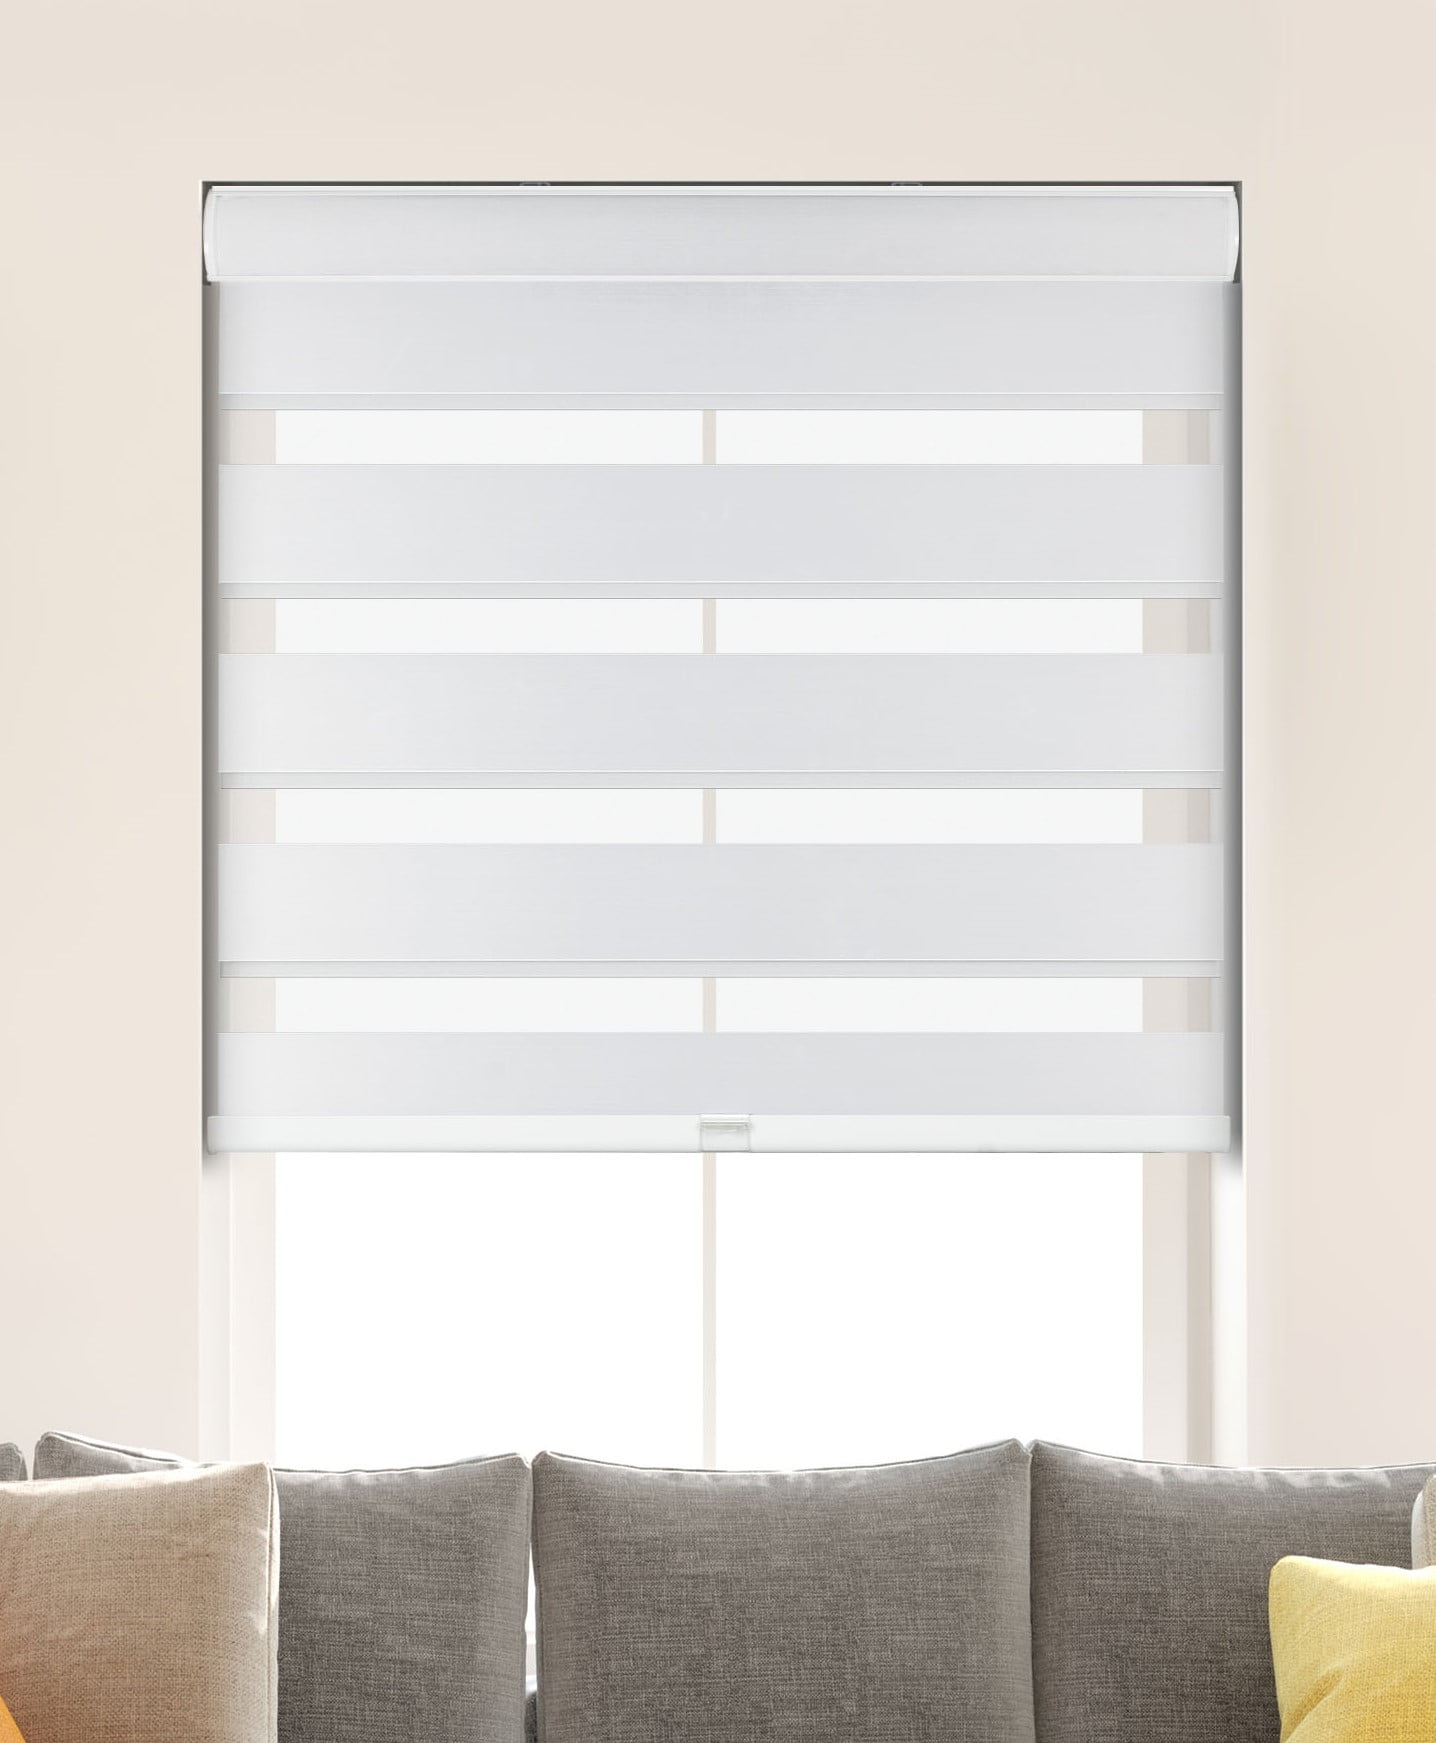 66"x72" Cordless Window Roller Shades Free-Stop Dual Layer Zebra Blinds 